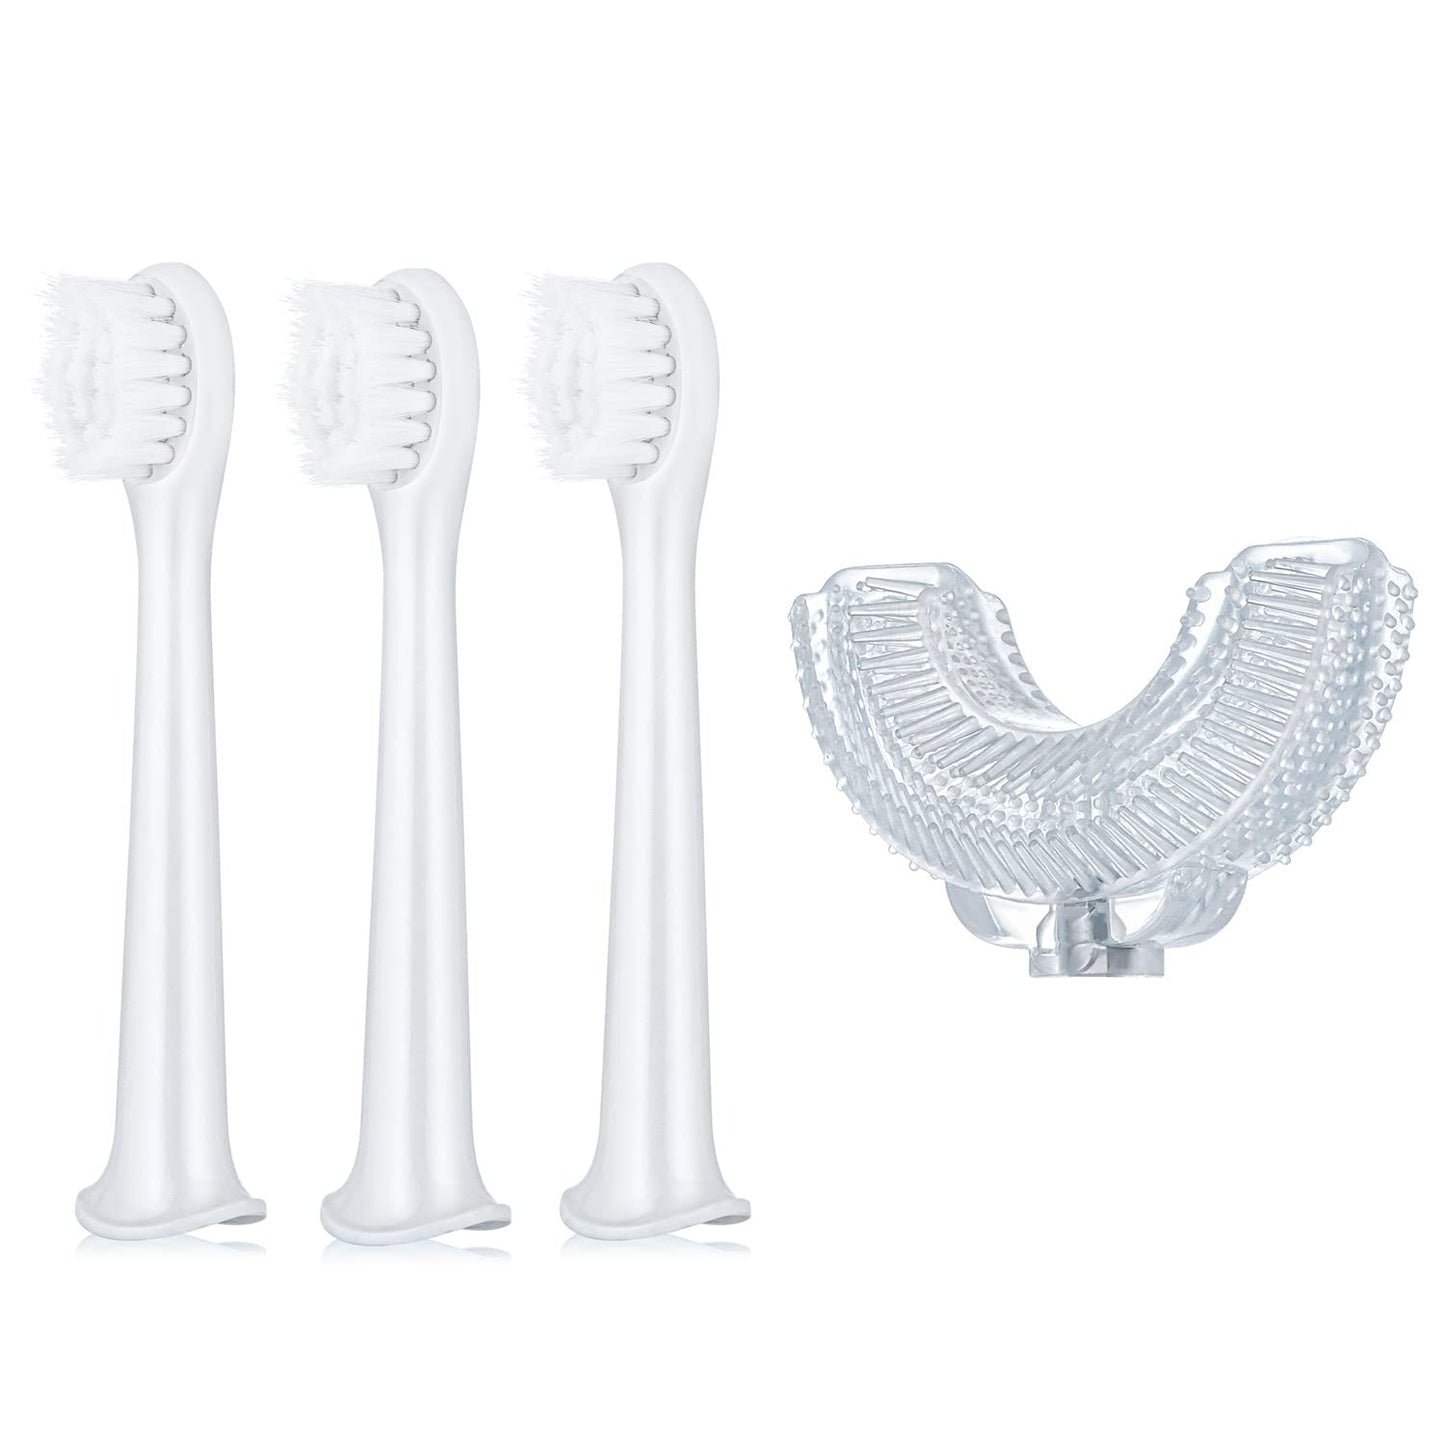 U-Shape Electric Toothbrush 4 Pieces Replacement Head Kit - 1 Silicone U-Shape Brush Head & 3 Toothbrush Heads